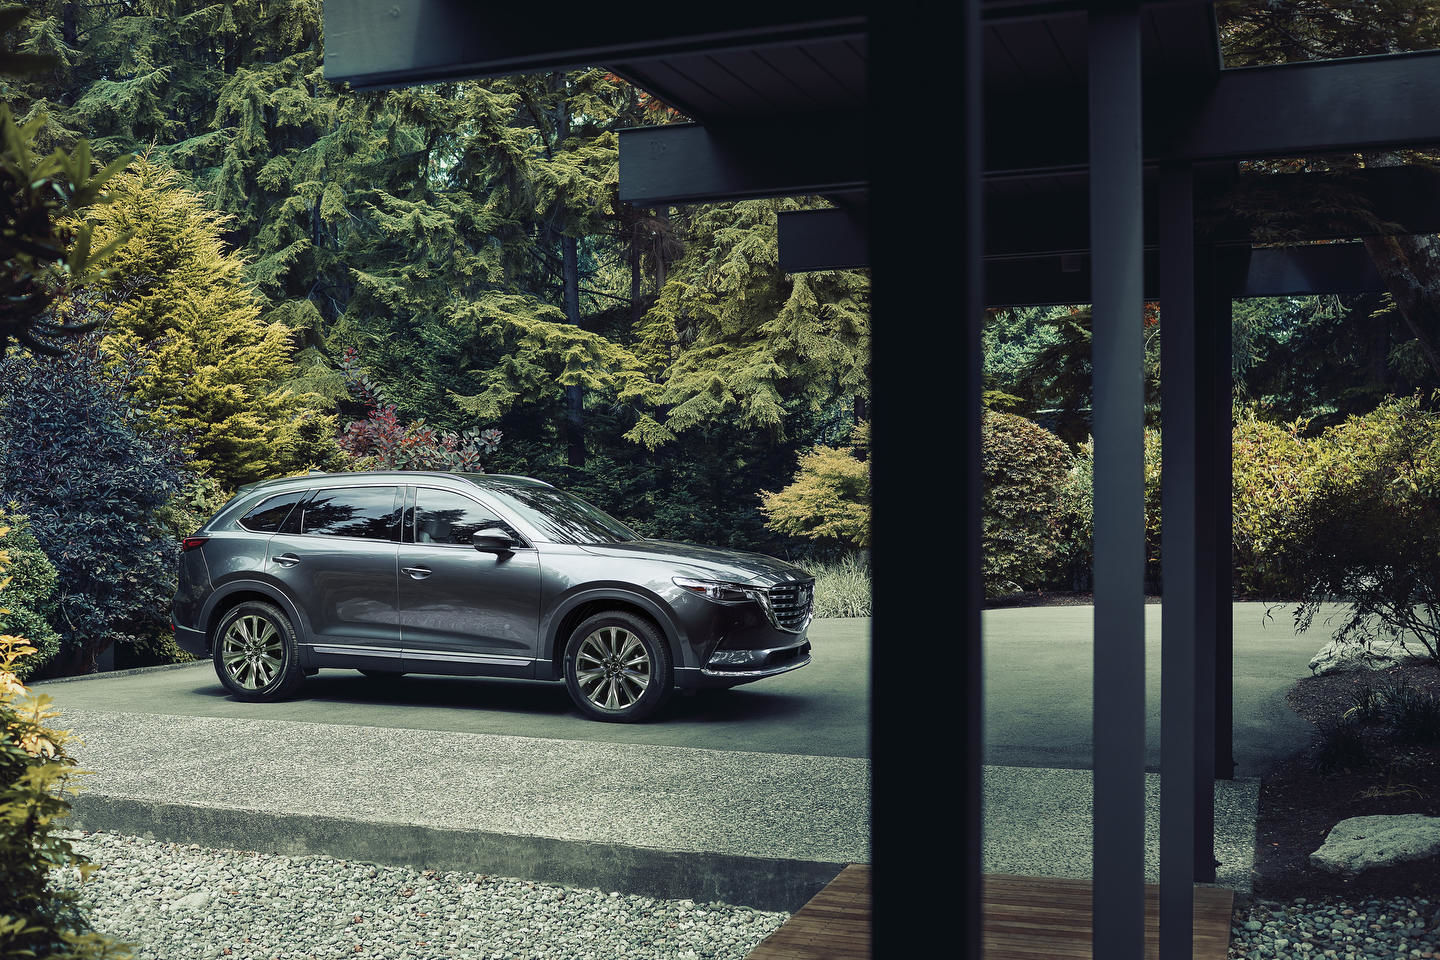 The 2022 Mazda CX-9 has everything you're looking for